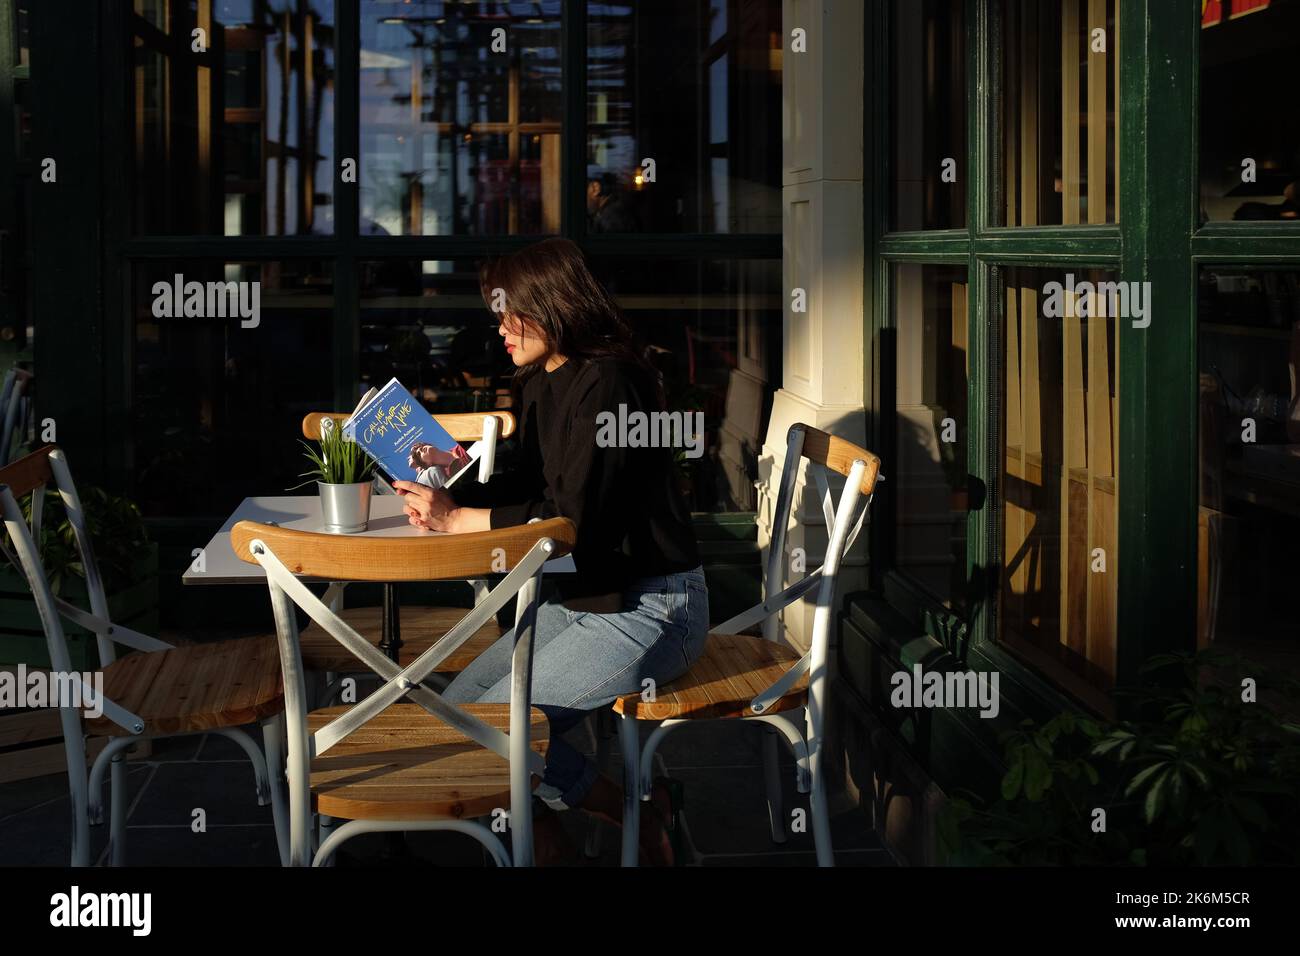 Asian woman wearing dark sweater and light jeans sits on a chair outside a cafe. Female is reading a book, outdoors, on a beautiful summer day. Stock Photo